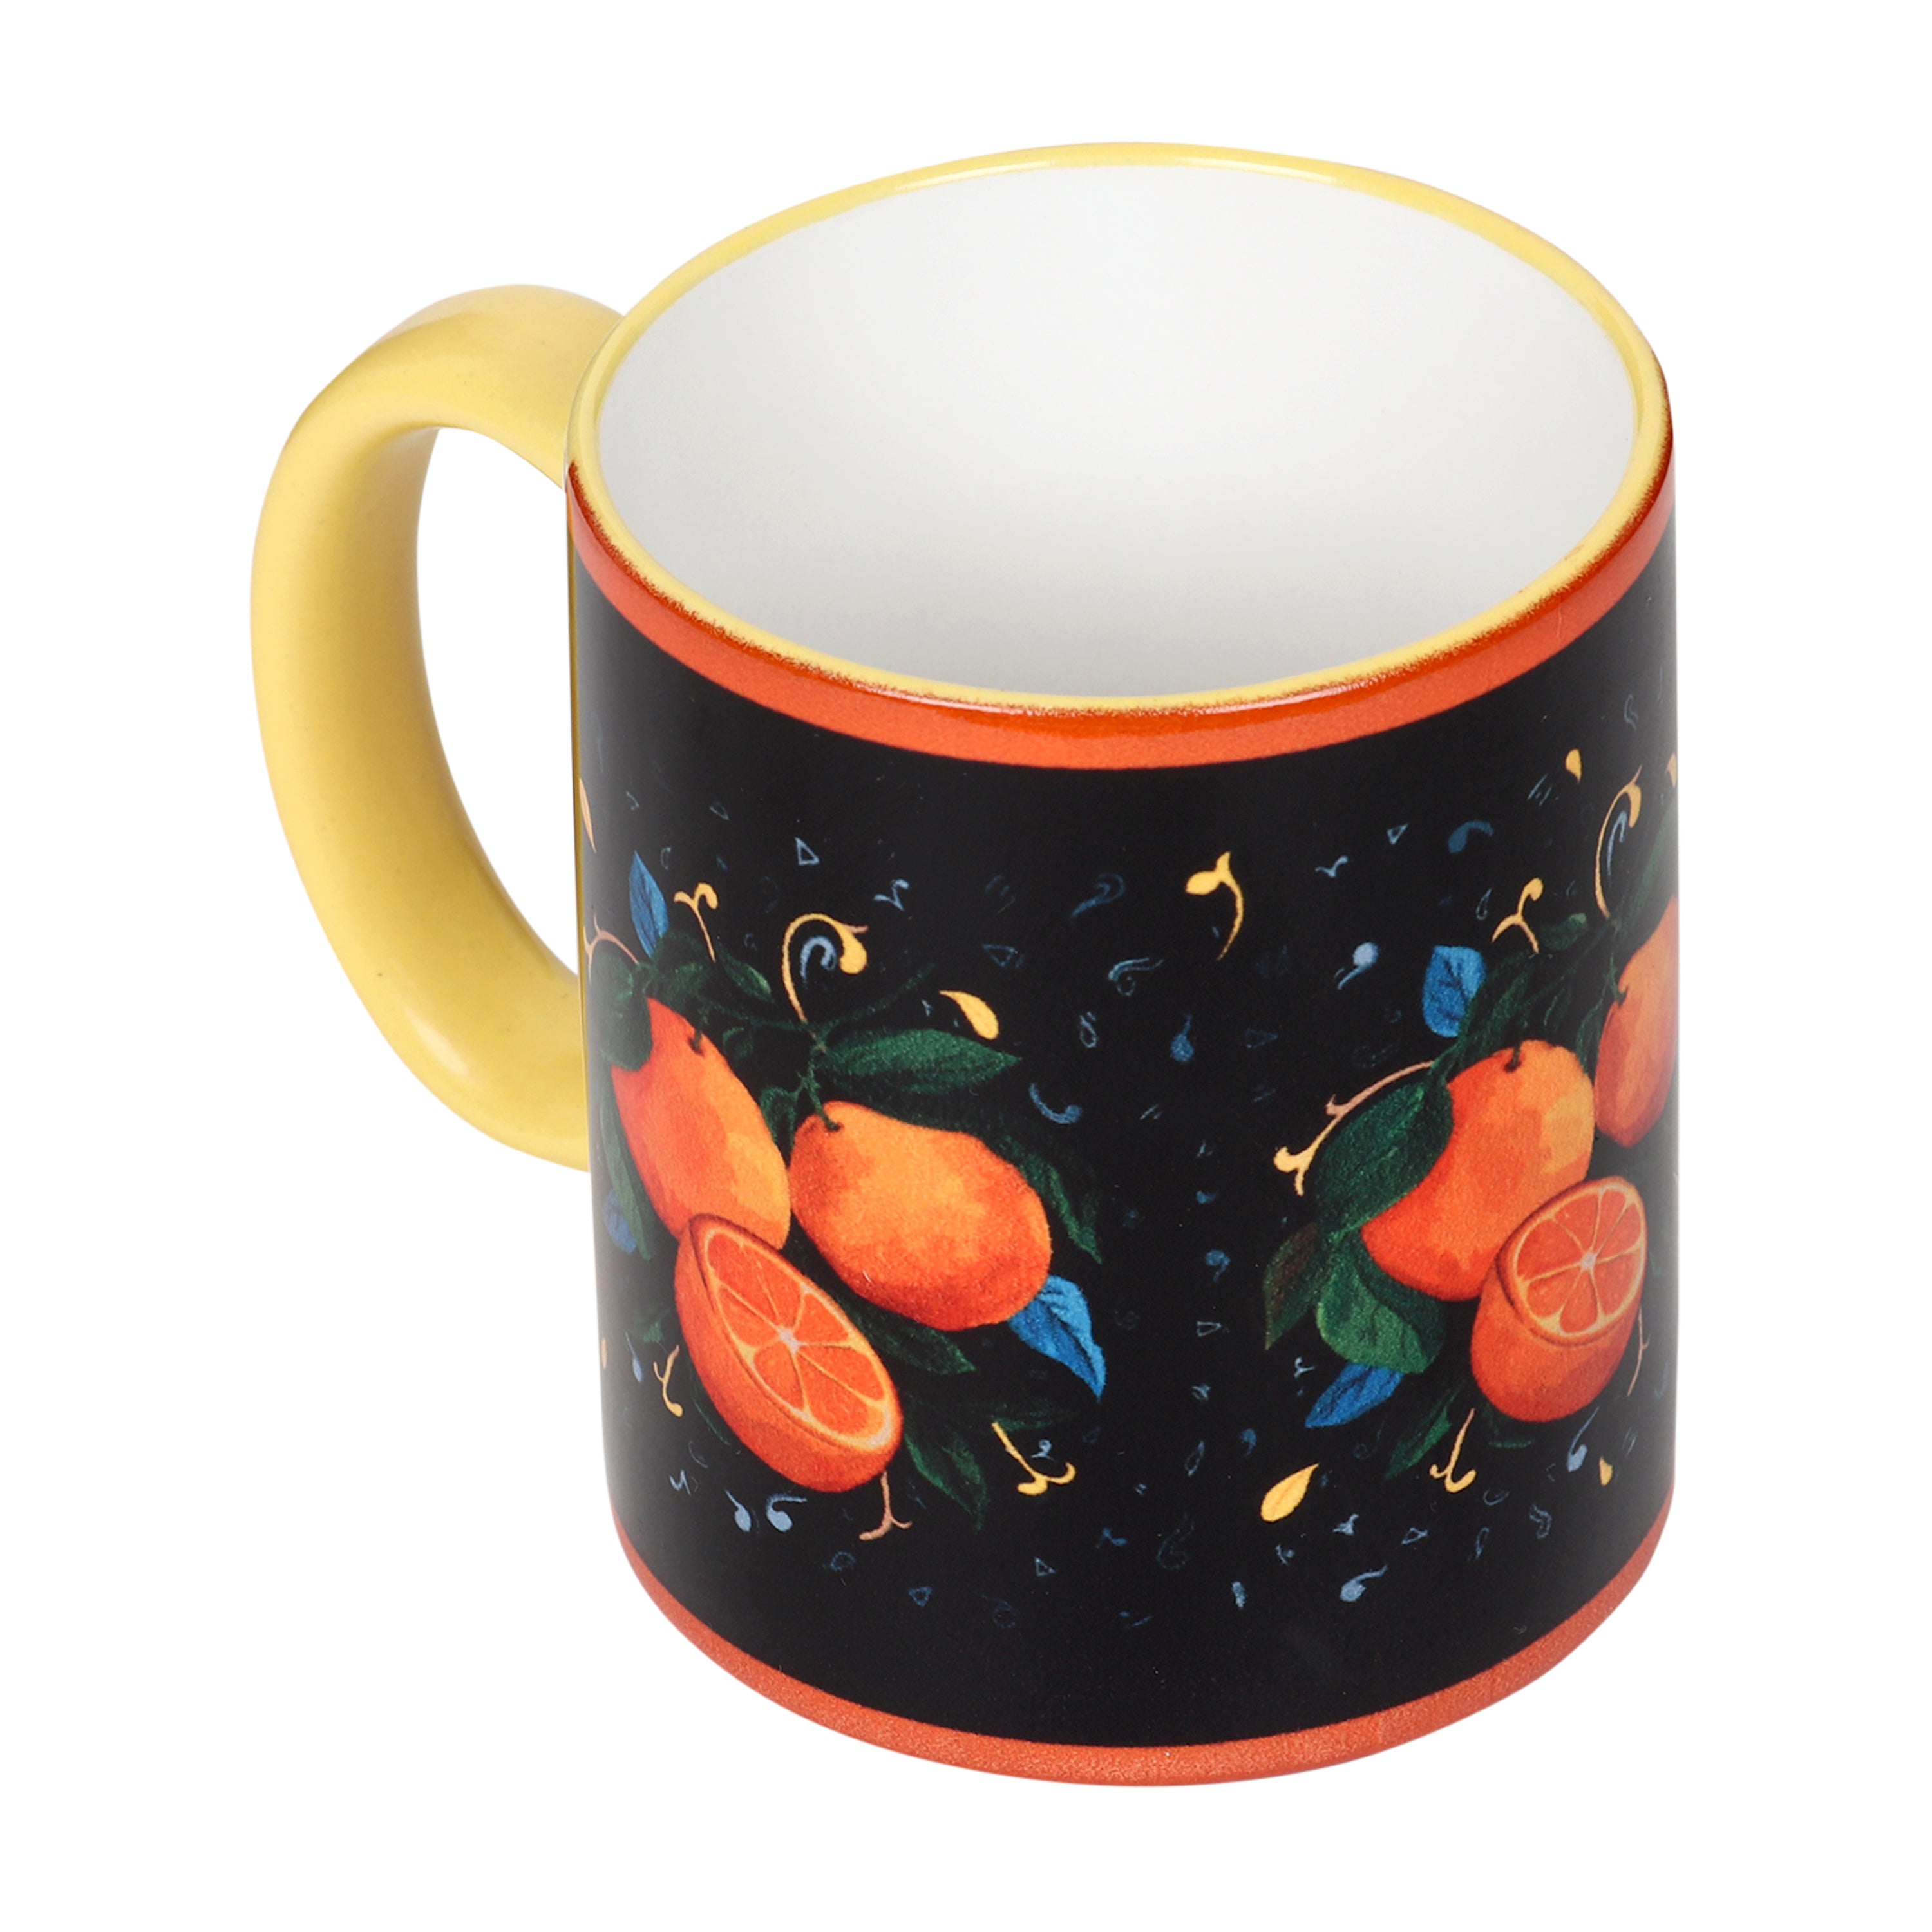 Mugs -Oranges from Italy